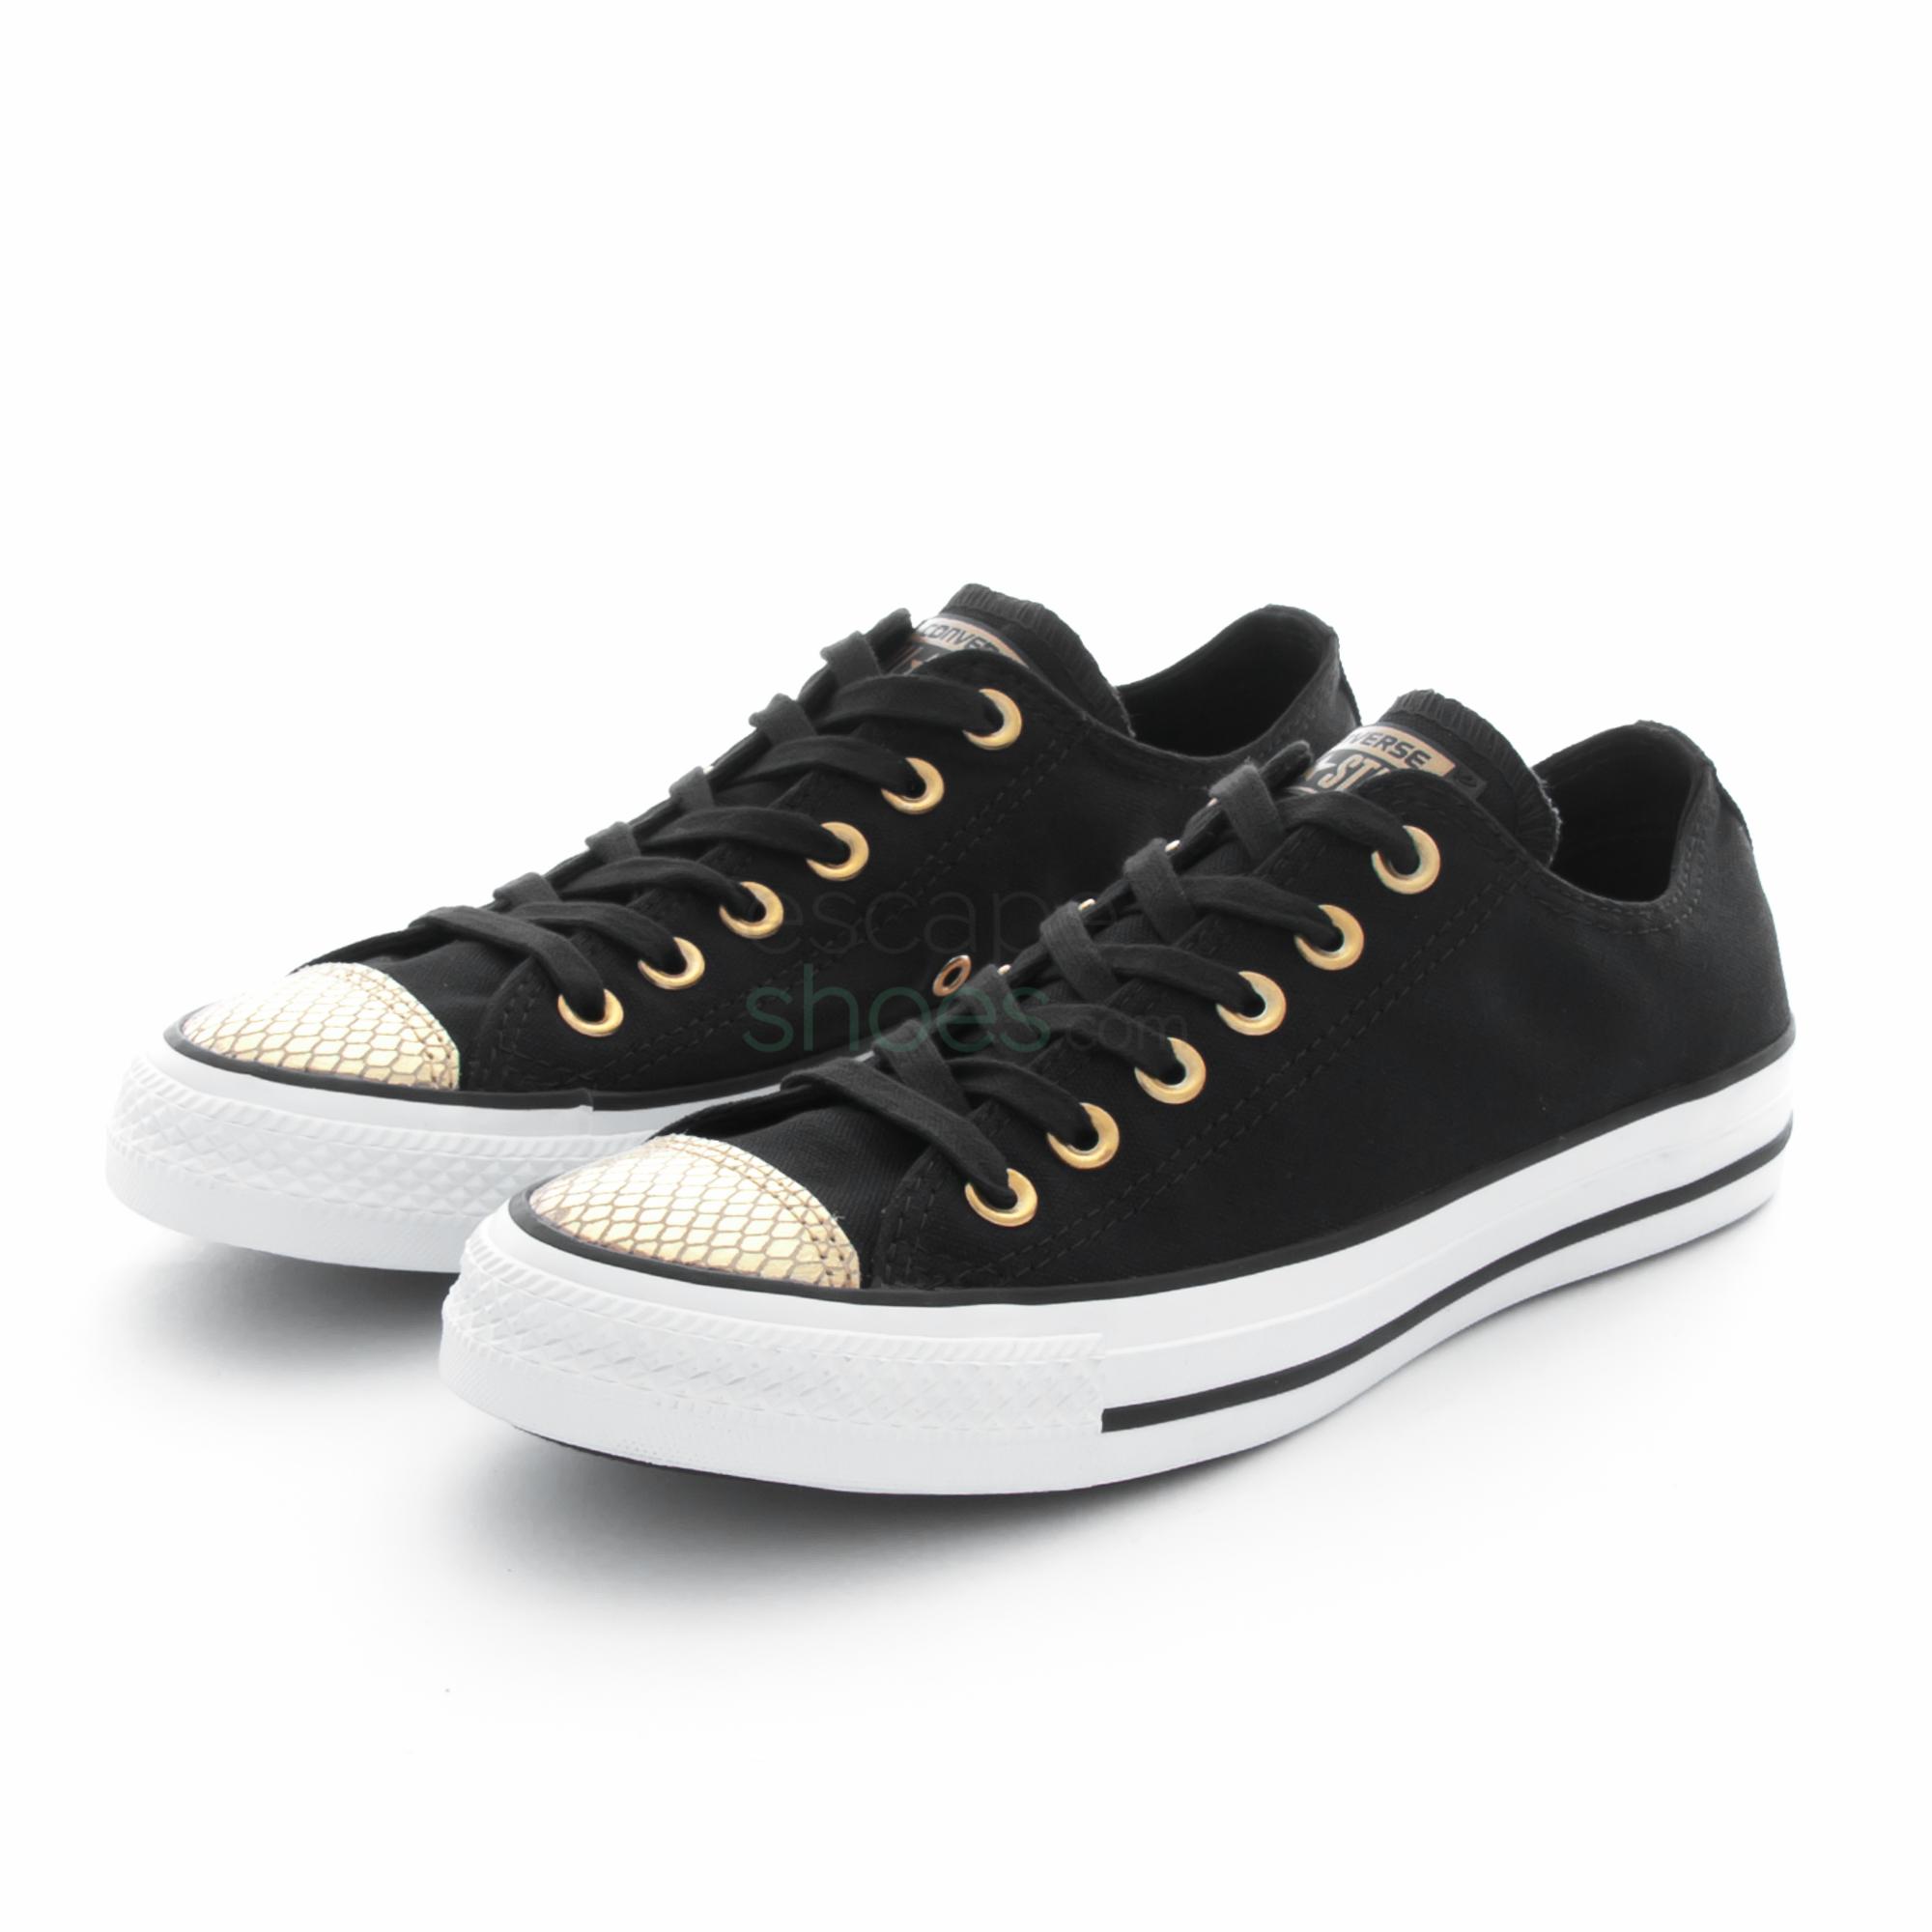 black and gold converse shoes